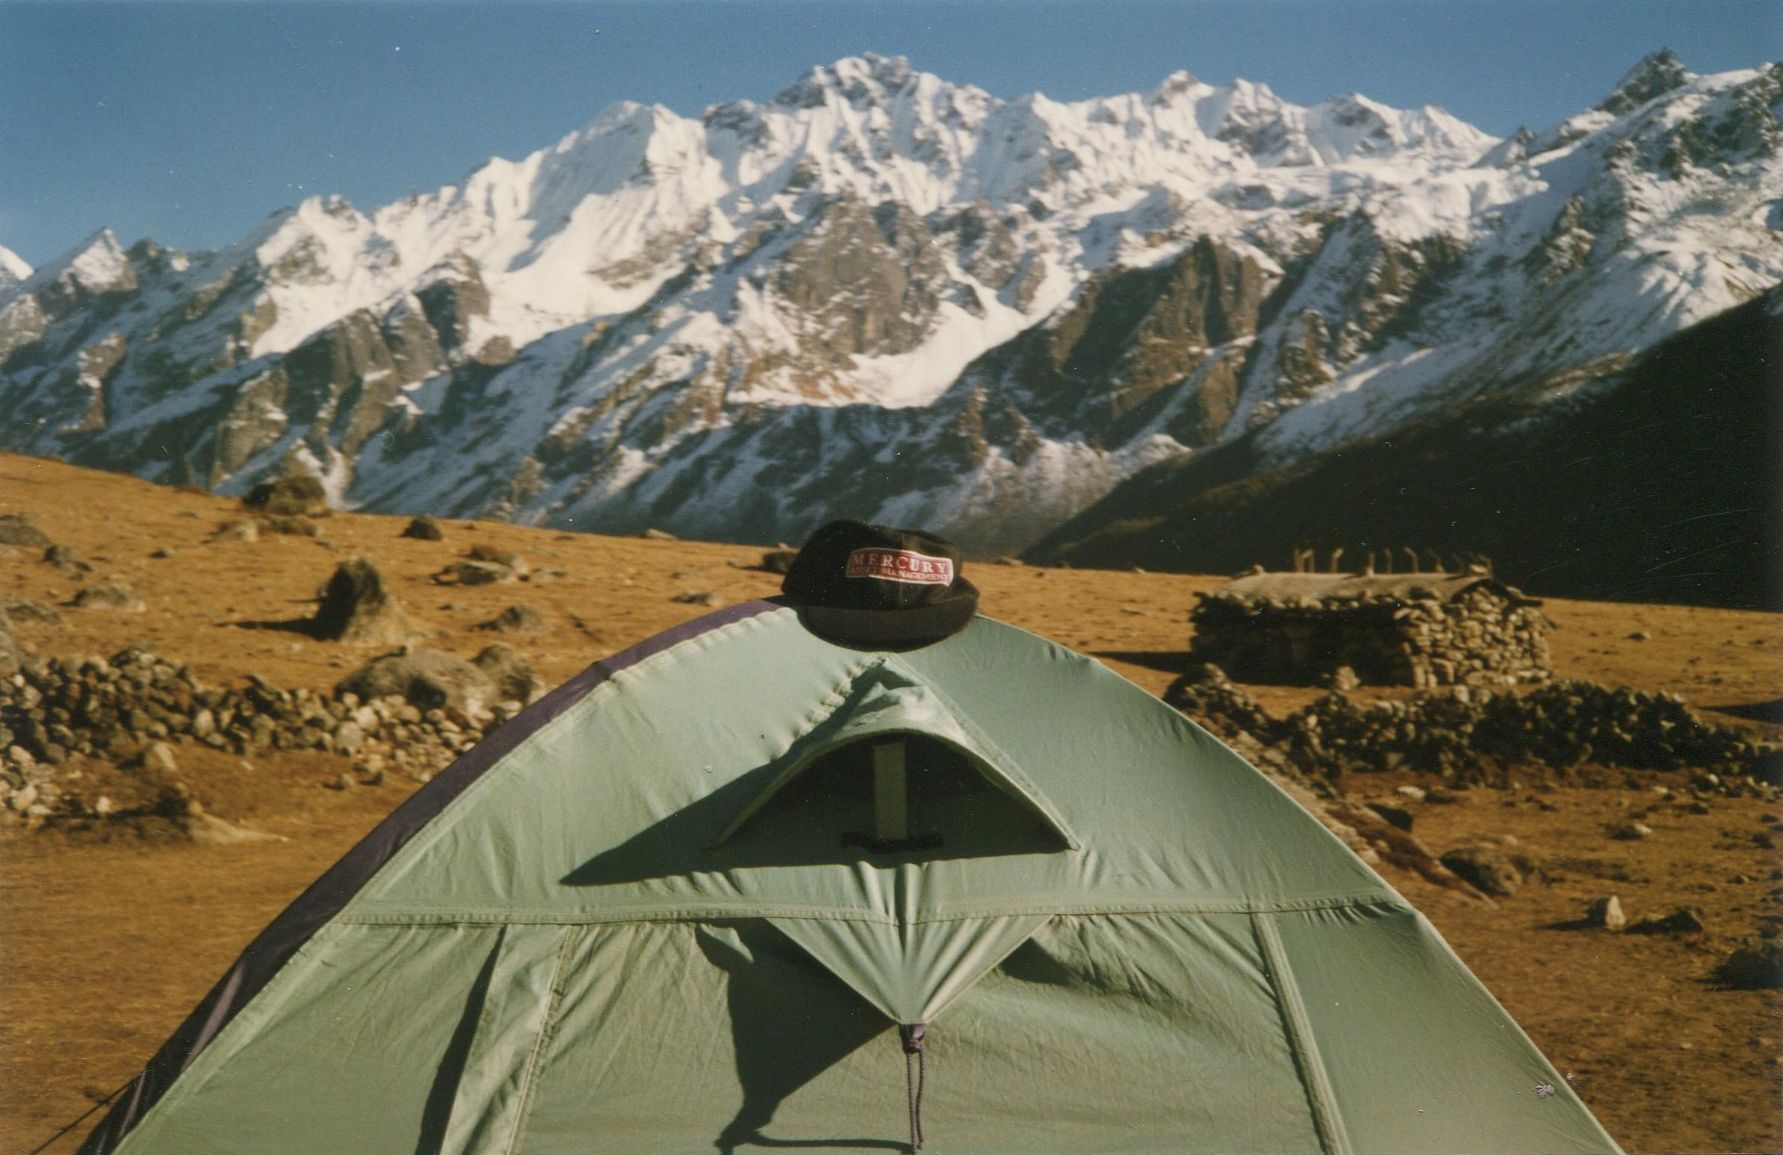 Mt.Pangen Dobku from Kyanjin in the Langtang Valley